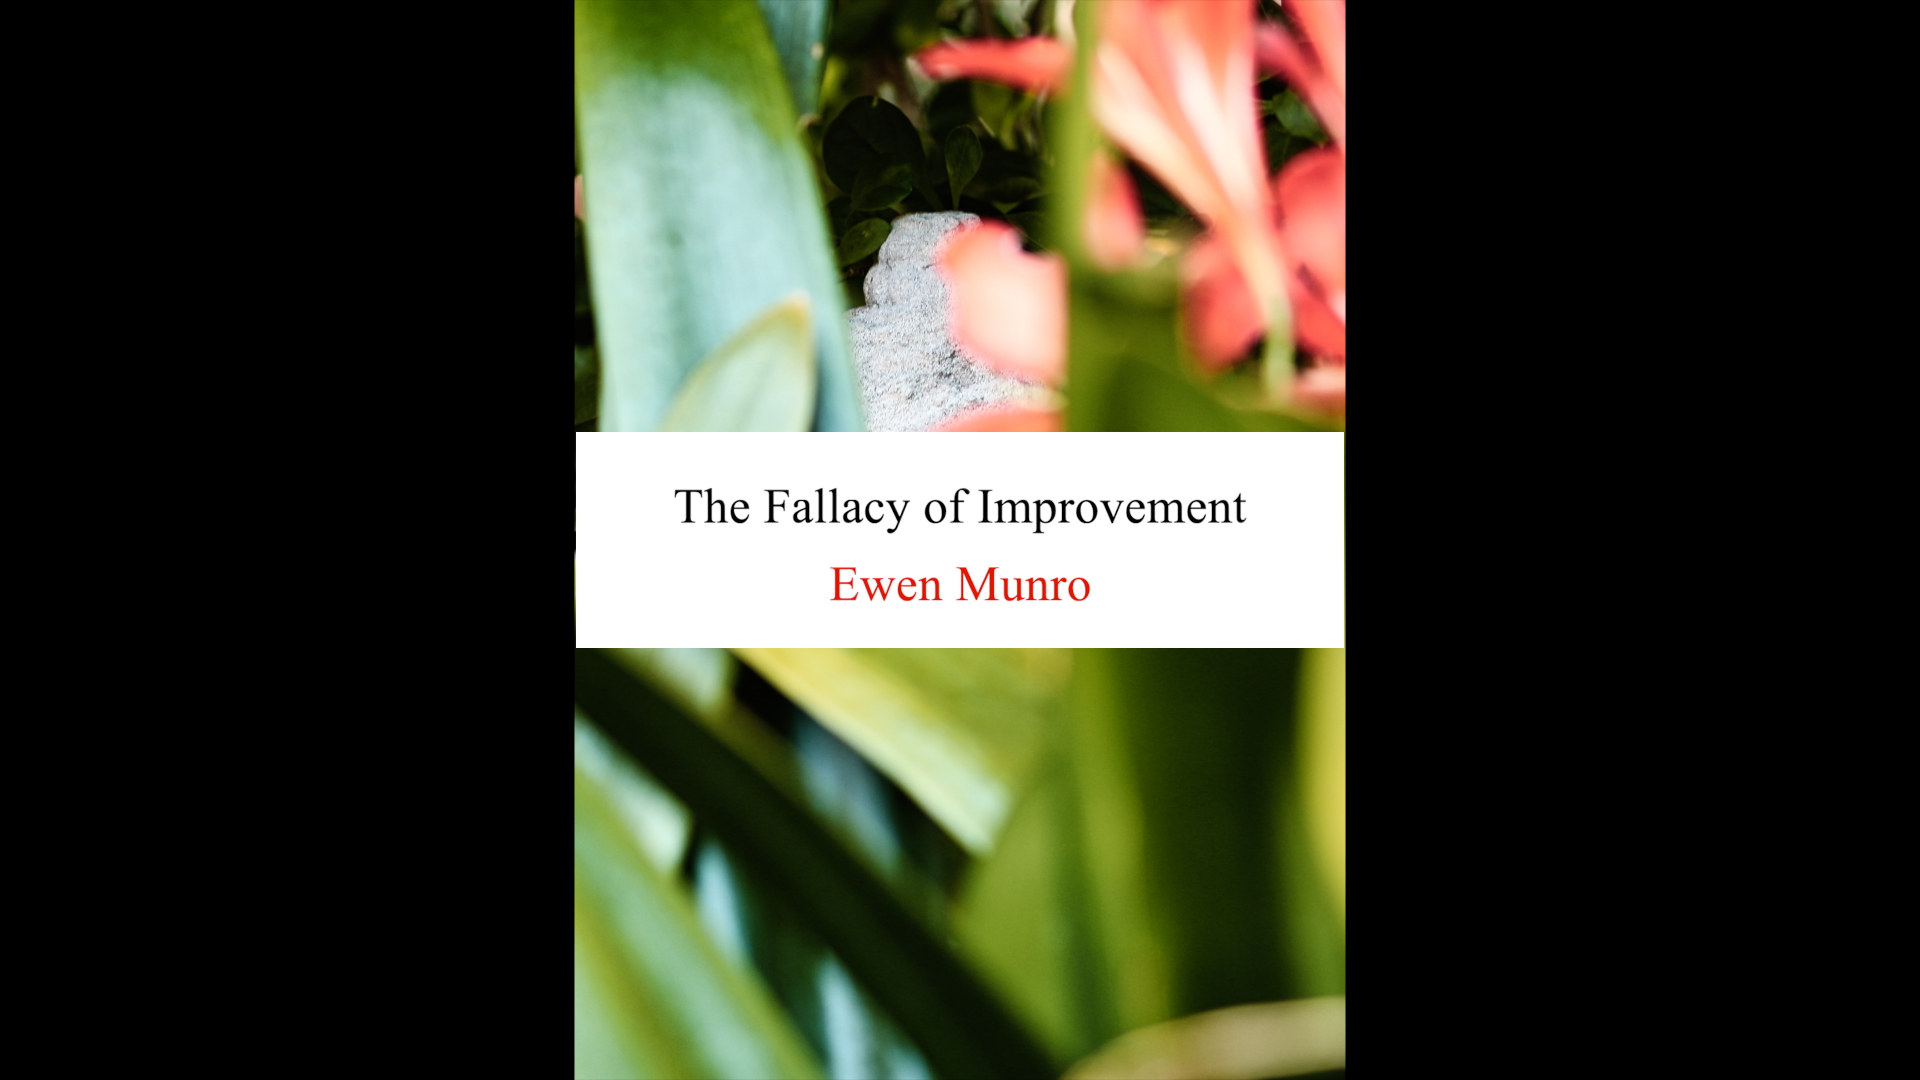 Cover page of 'The Fallacy of Improvement' essay